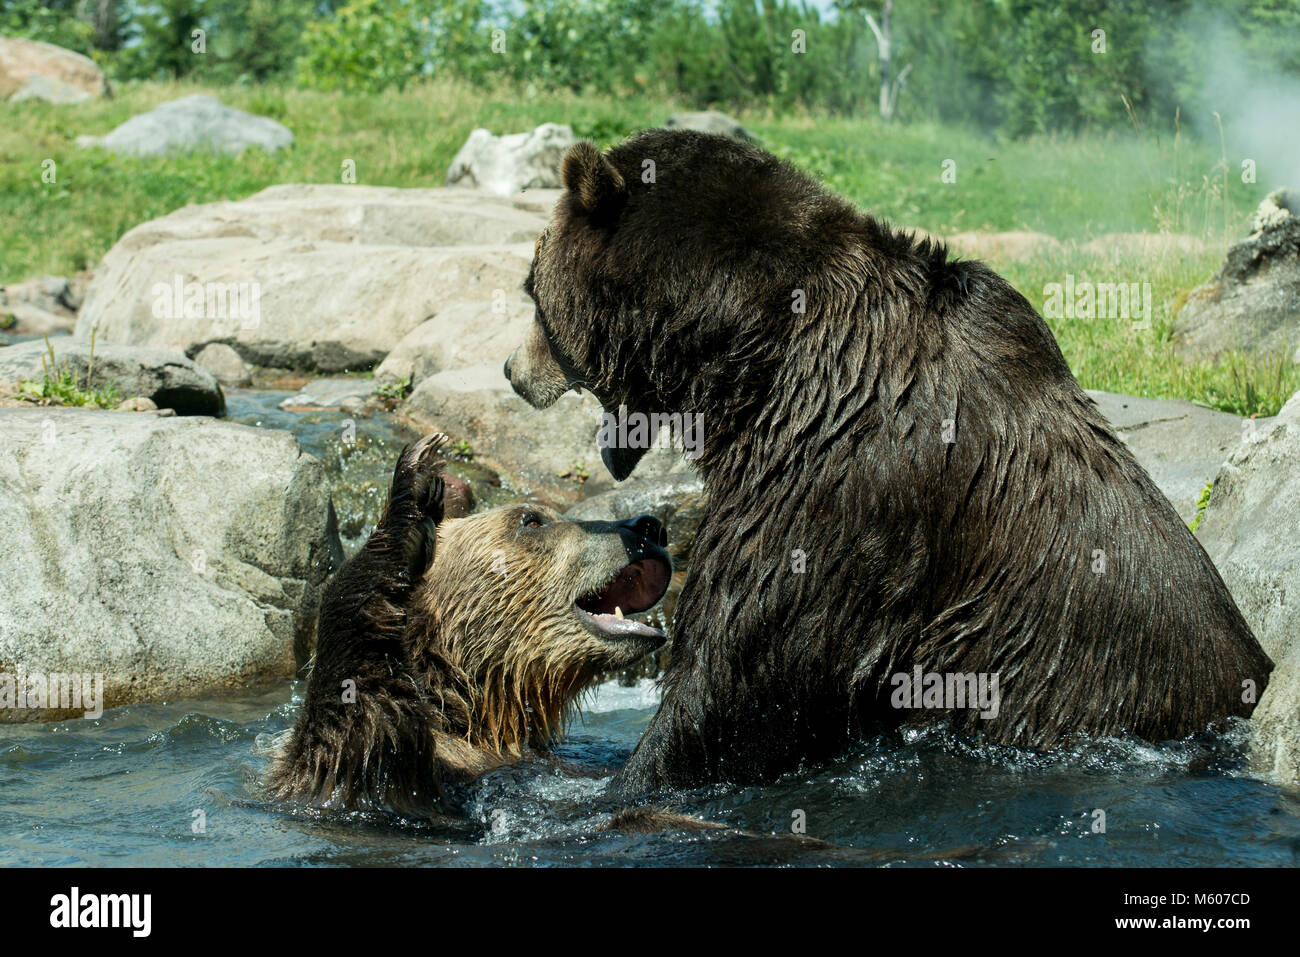 Apple Valley, Minnesota. Minnesota Zoo.  Russia's Grizzly coast exhibit. Brown Bear aka Grizzly, Ursus arctos. Bears are probably fighting to show the Stock Photo